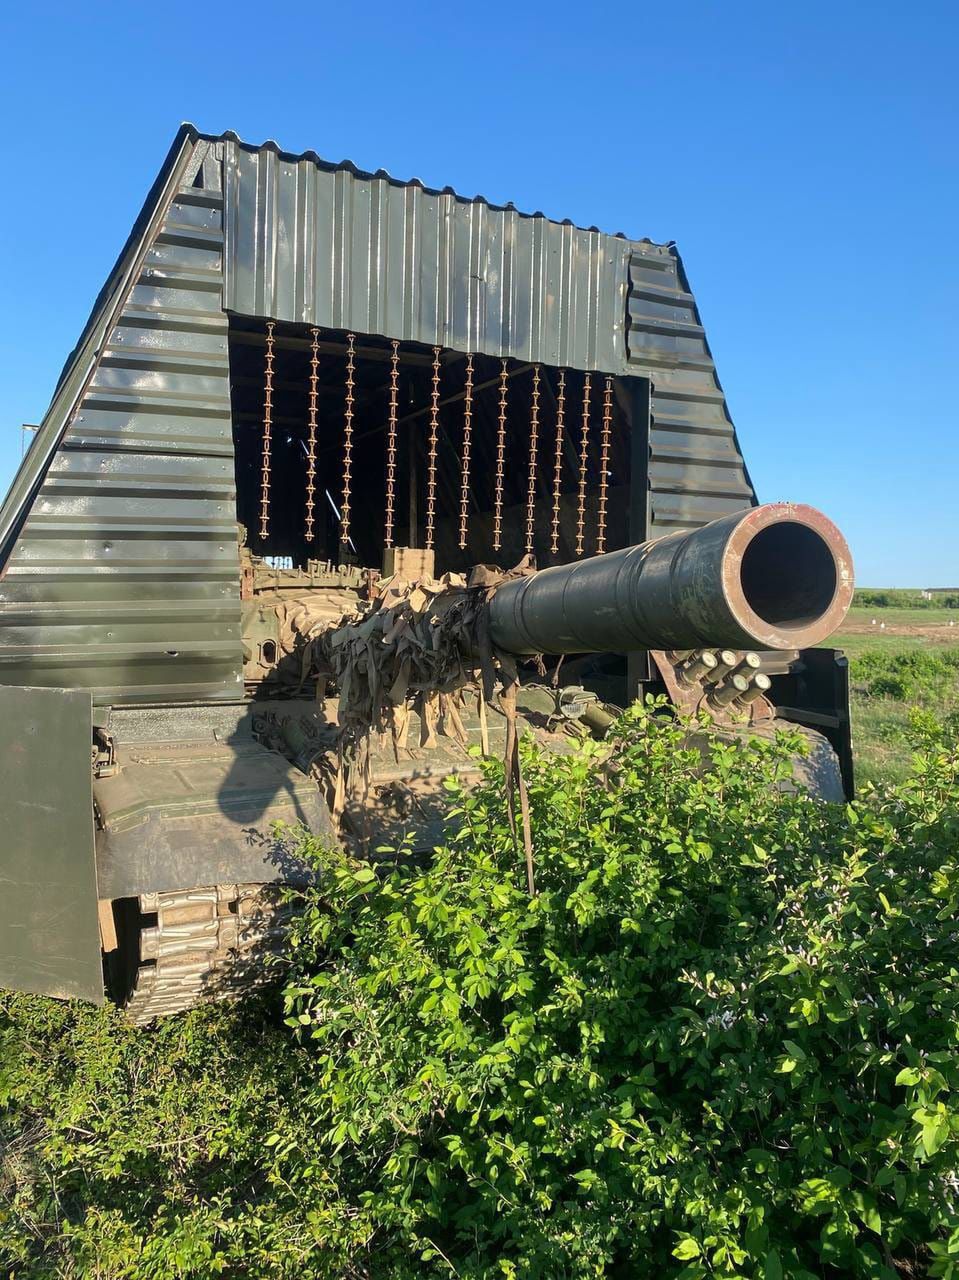 Russian "armoured barn" with additional curtains.